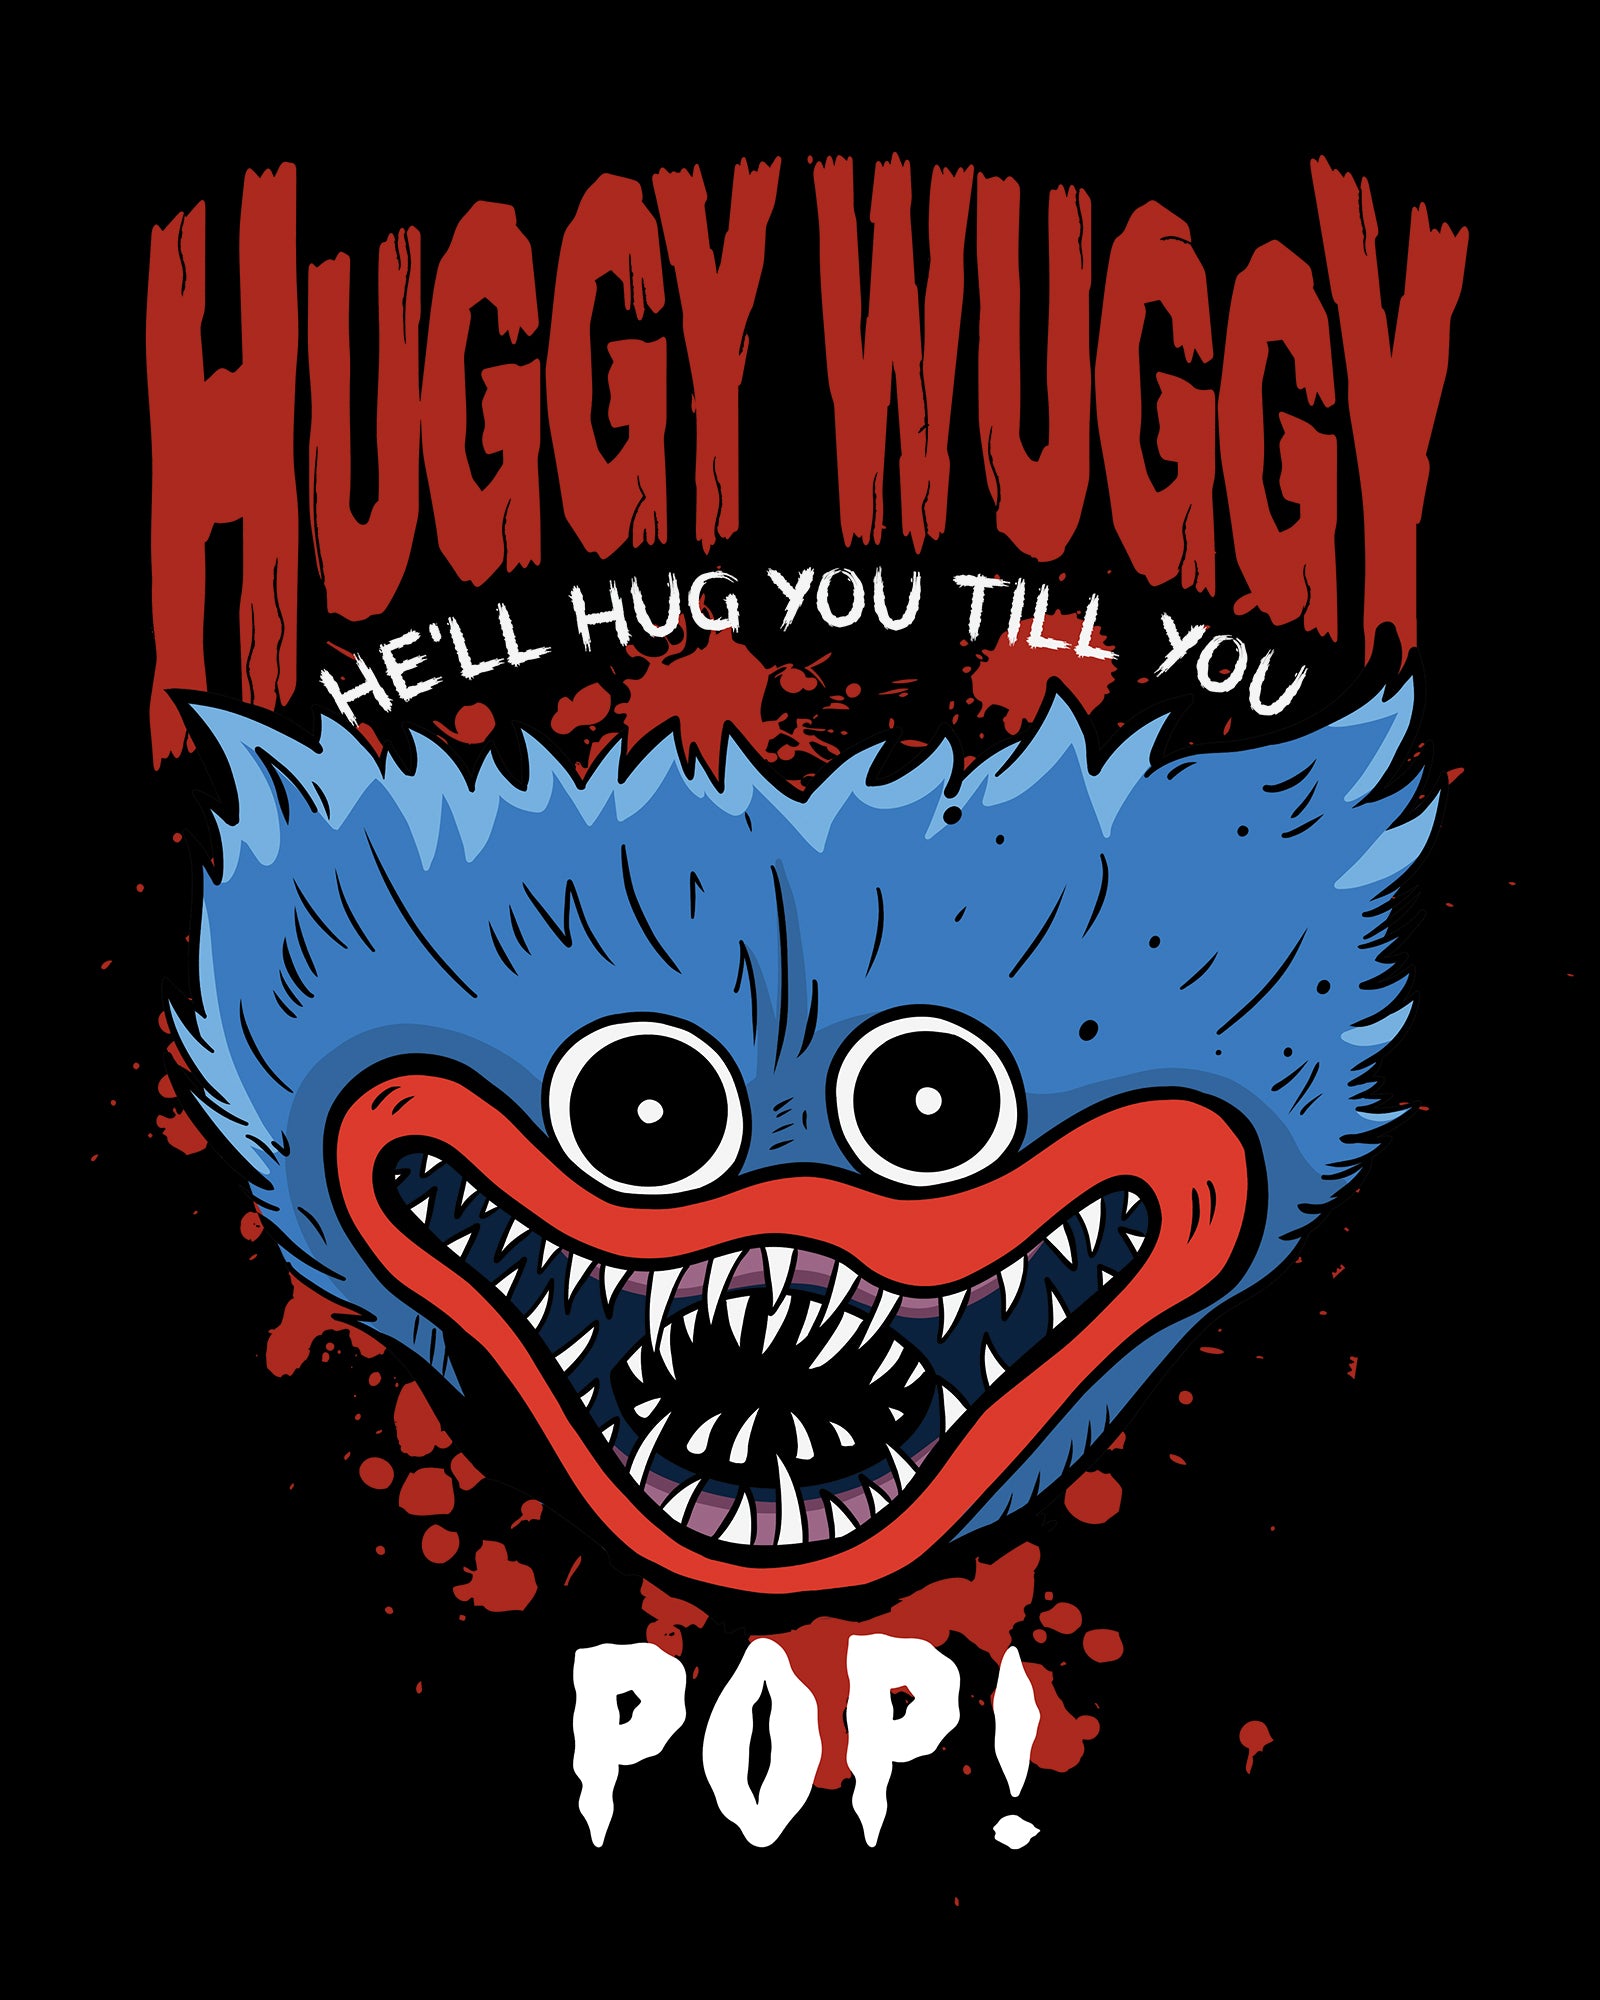 Poppy Playtime - Chapter 1 - Huggy will hug you till you pop